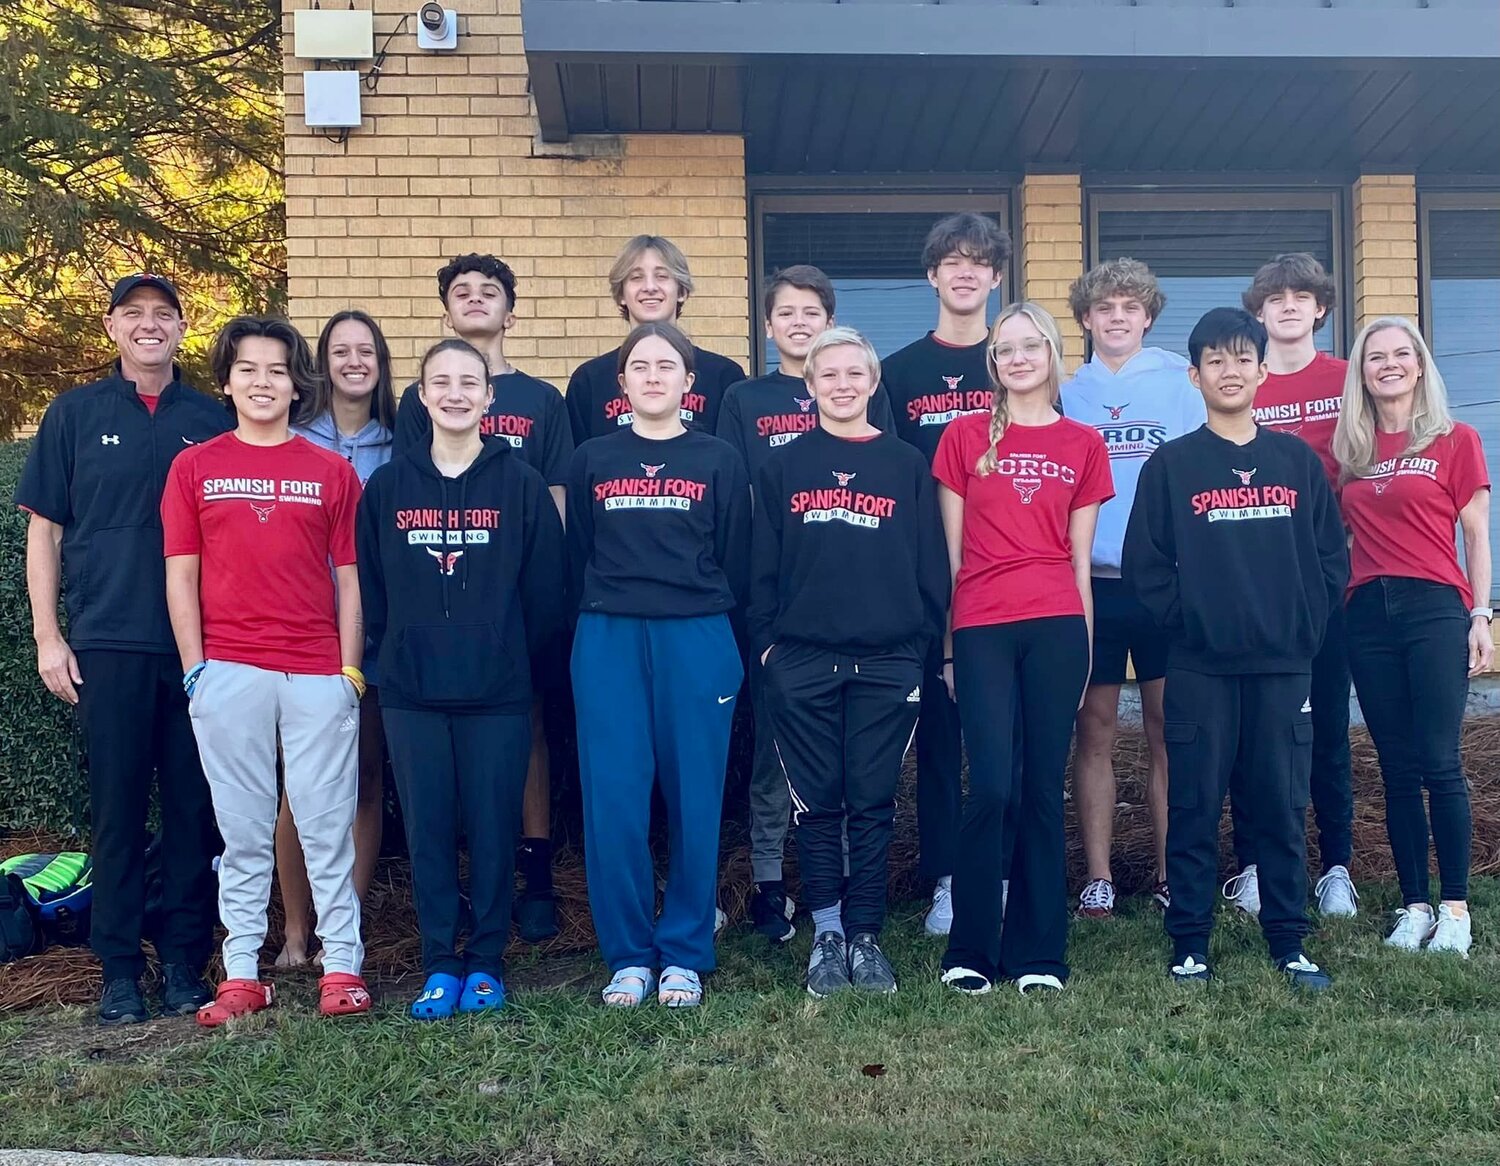 Spanish Fort was well represented at Nov. 17’s South Sectional Championship meet where eight members of the boys’ teams returned with medals after top-three finishes in their events. They’ll be among the 80 local swimmers competing in this weekend’s state championship meet.